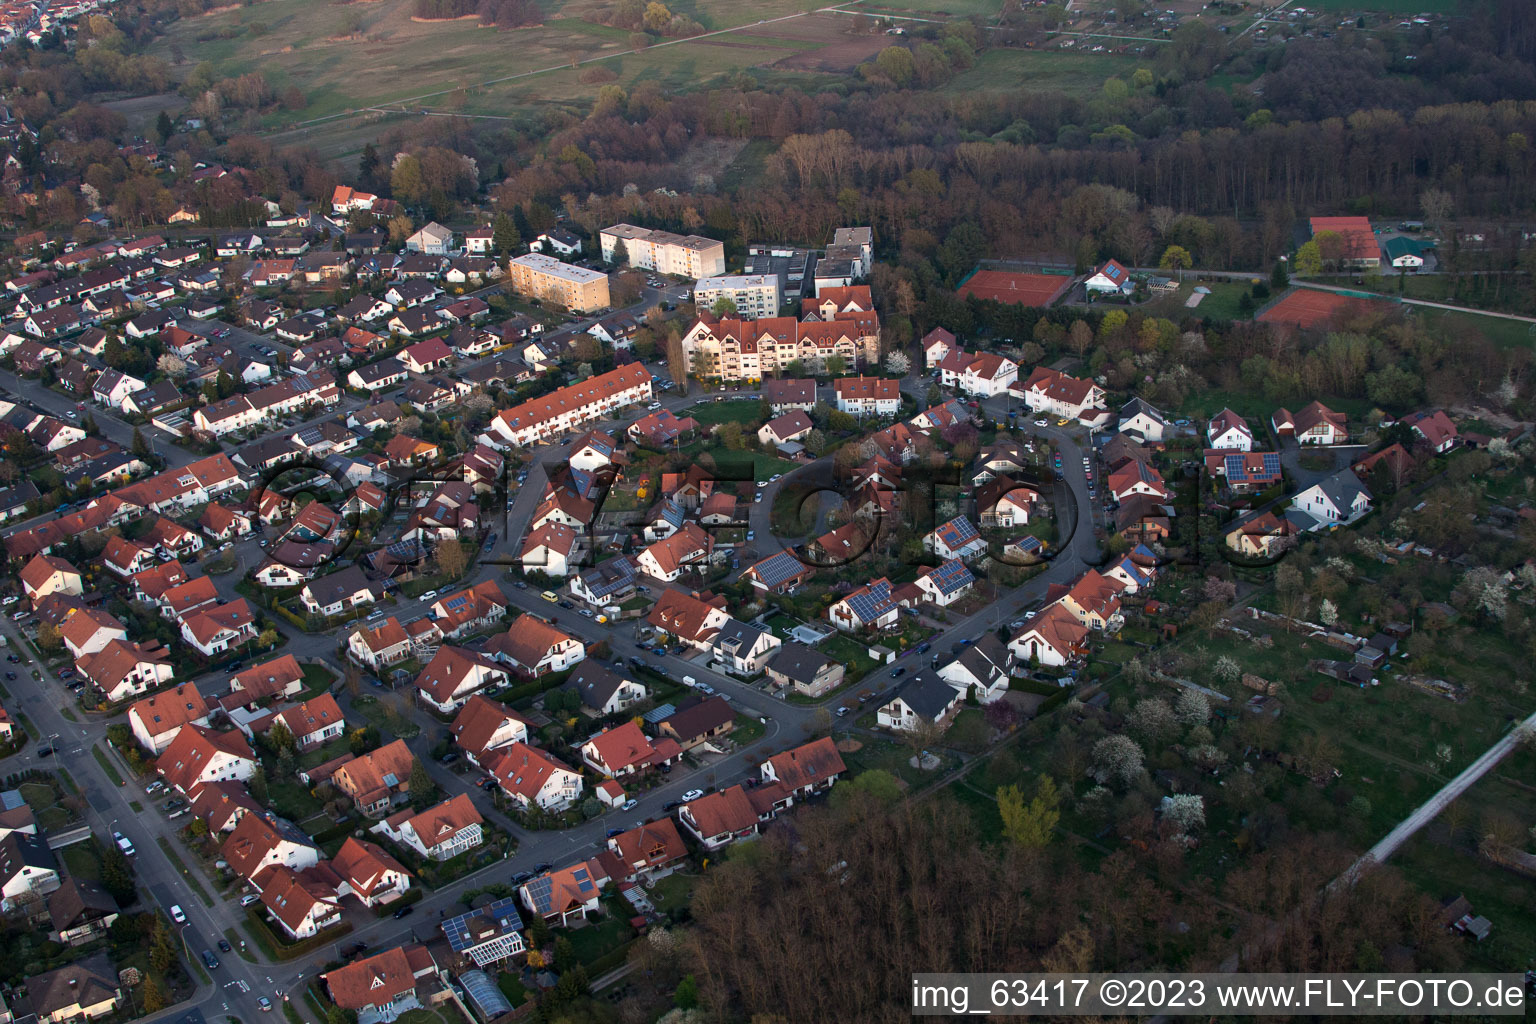 Drone image of Jockgrim in the state Rhineland-Palatinate, Germany